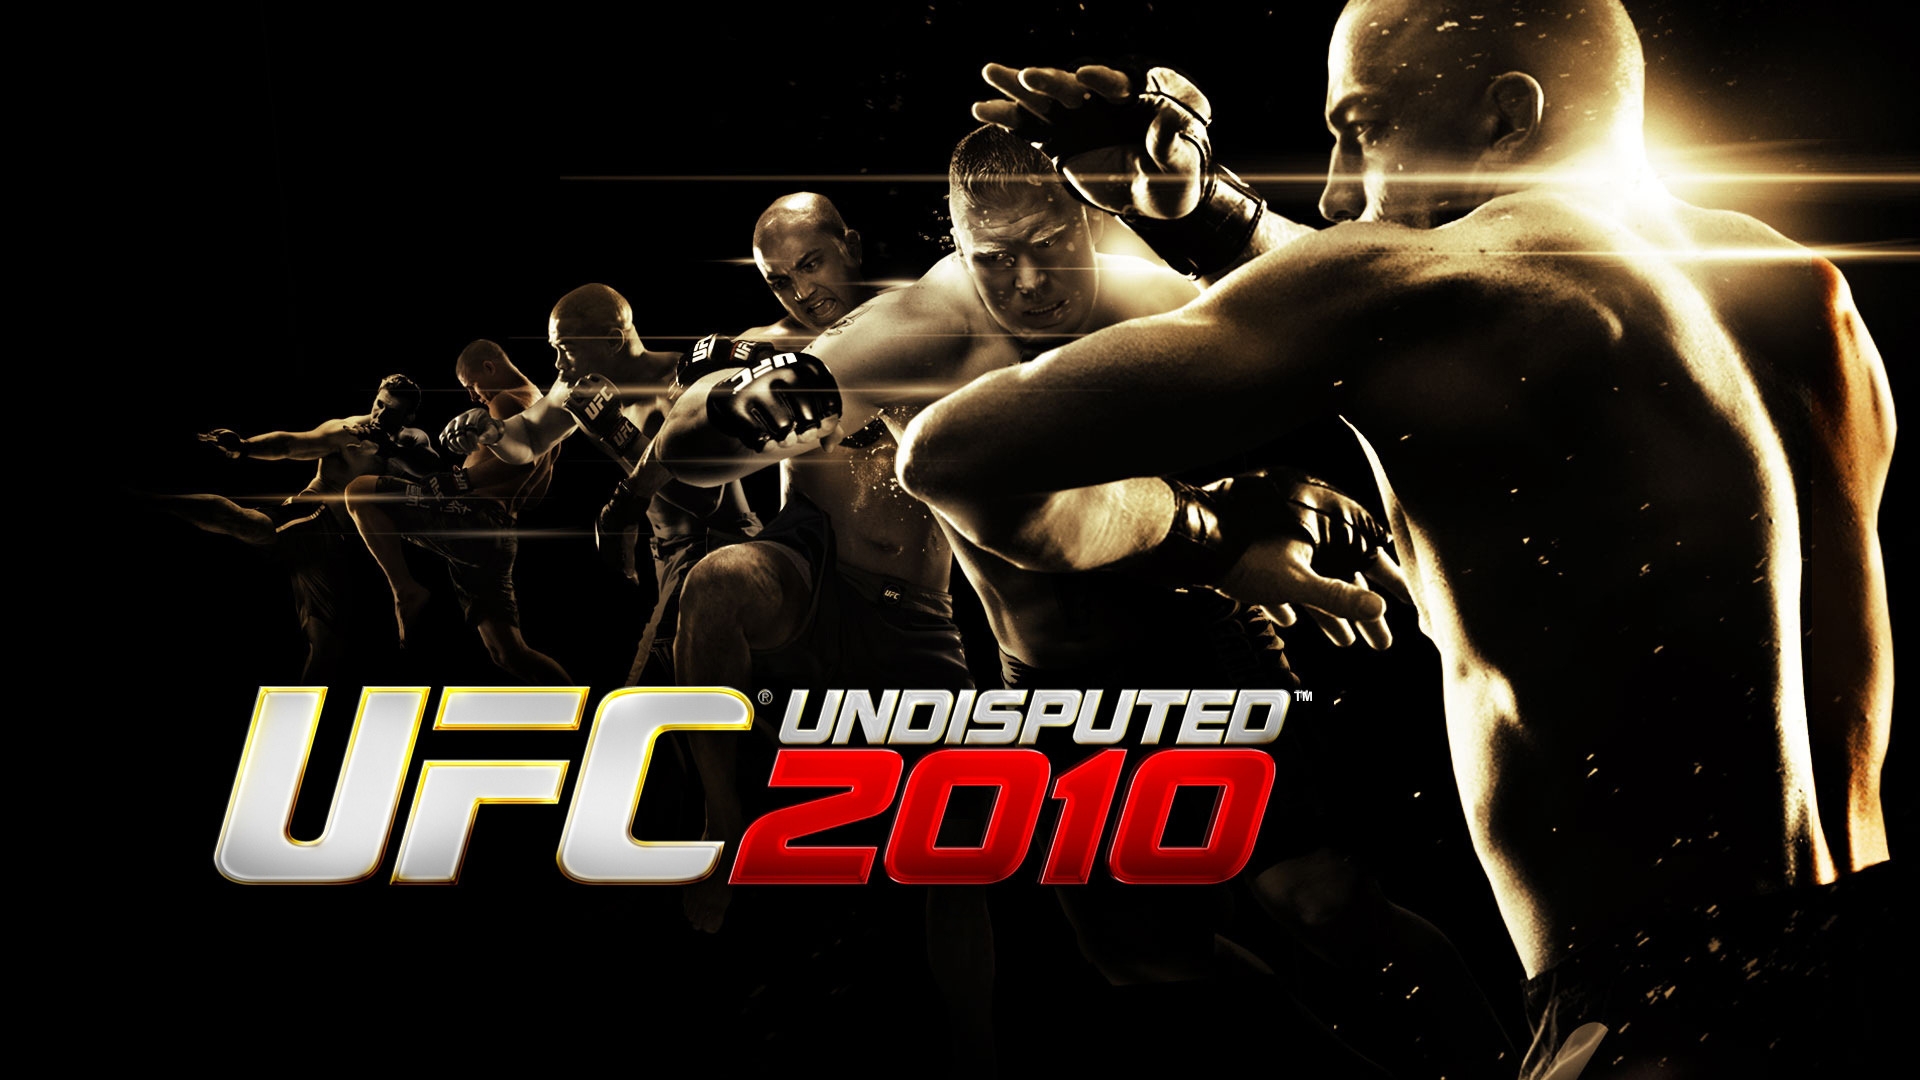 UFC Undisputed 2010 for 1920 x 1080 HDTV 1080p resolution